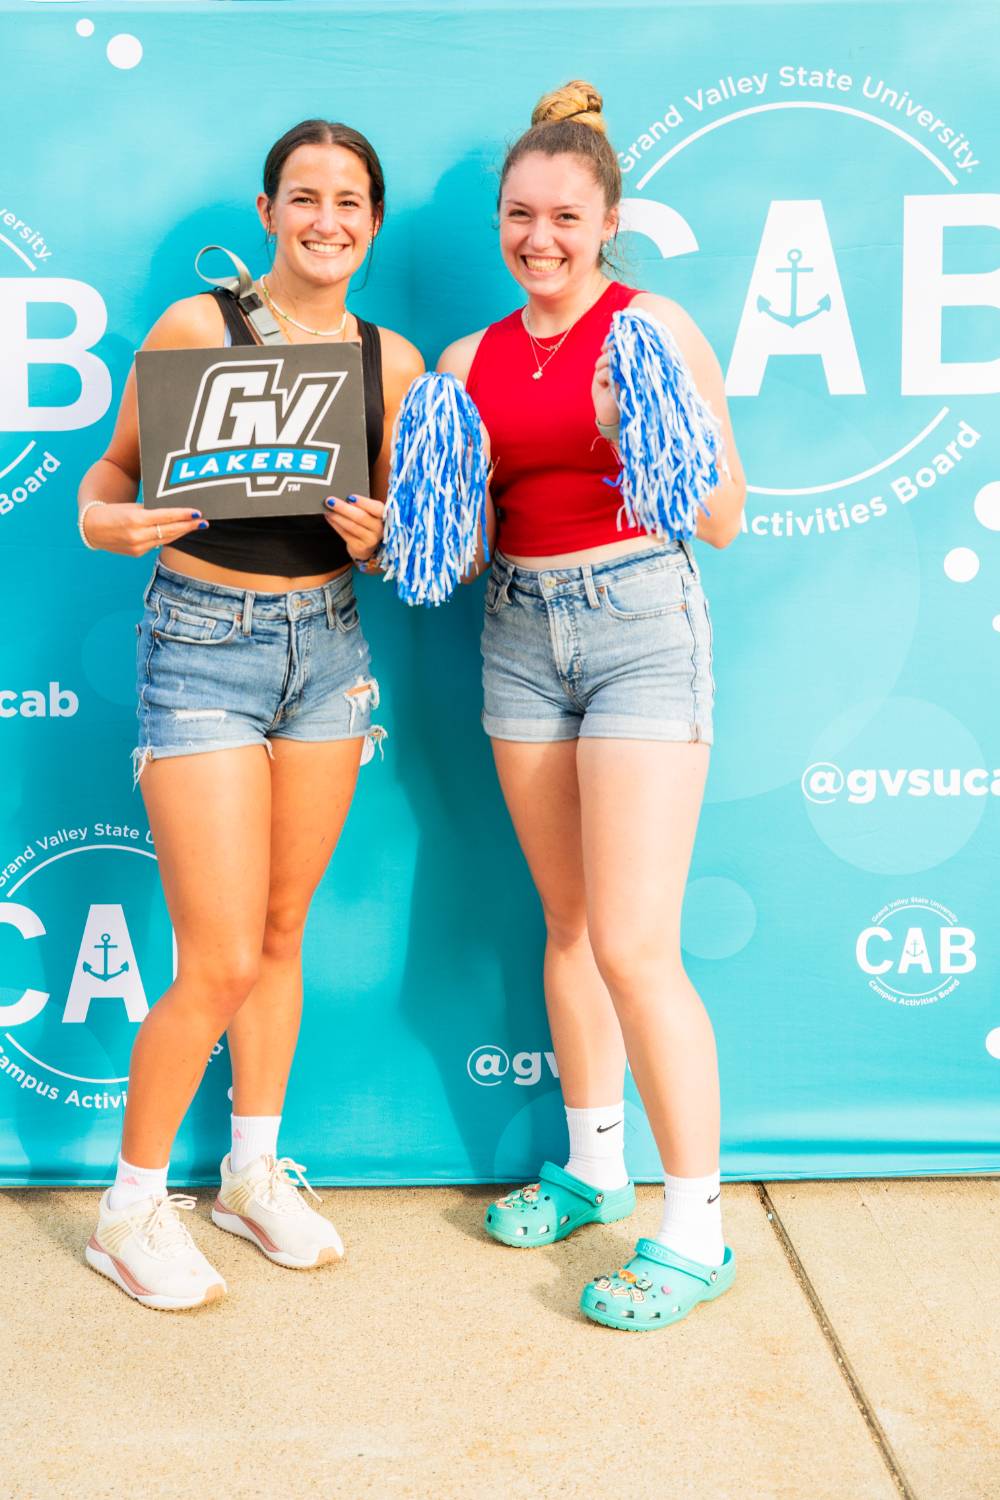 students posing in front of CAB backdrop at Laker Kickoff photo booth holding a GV sign and pom poms